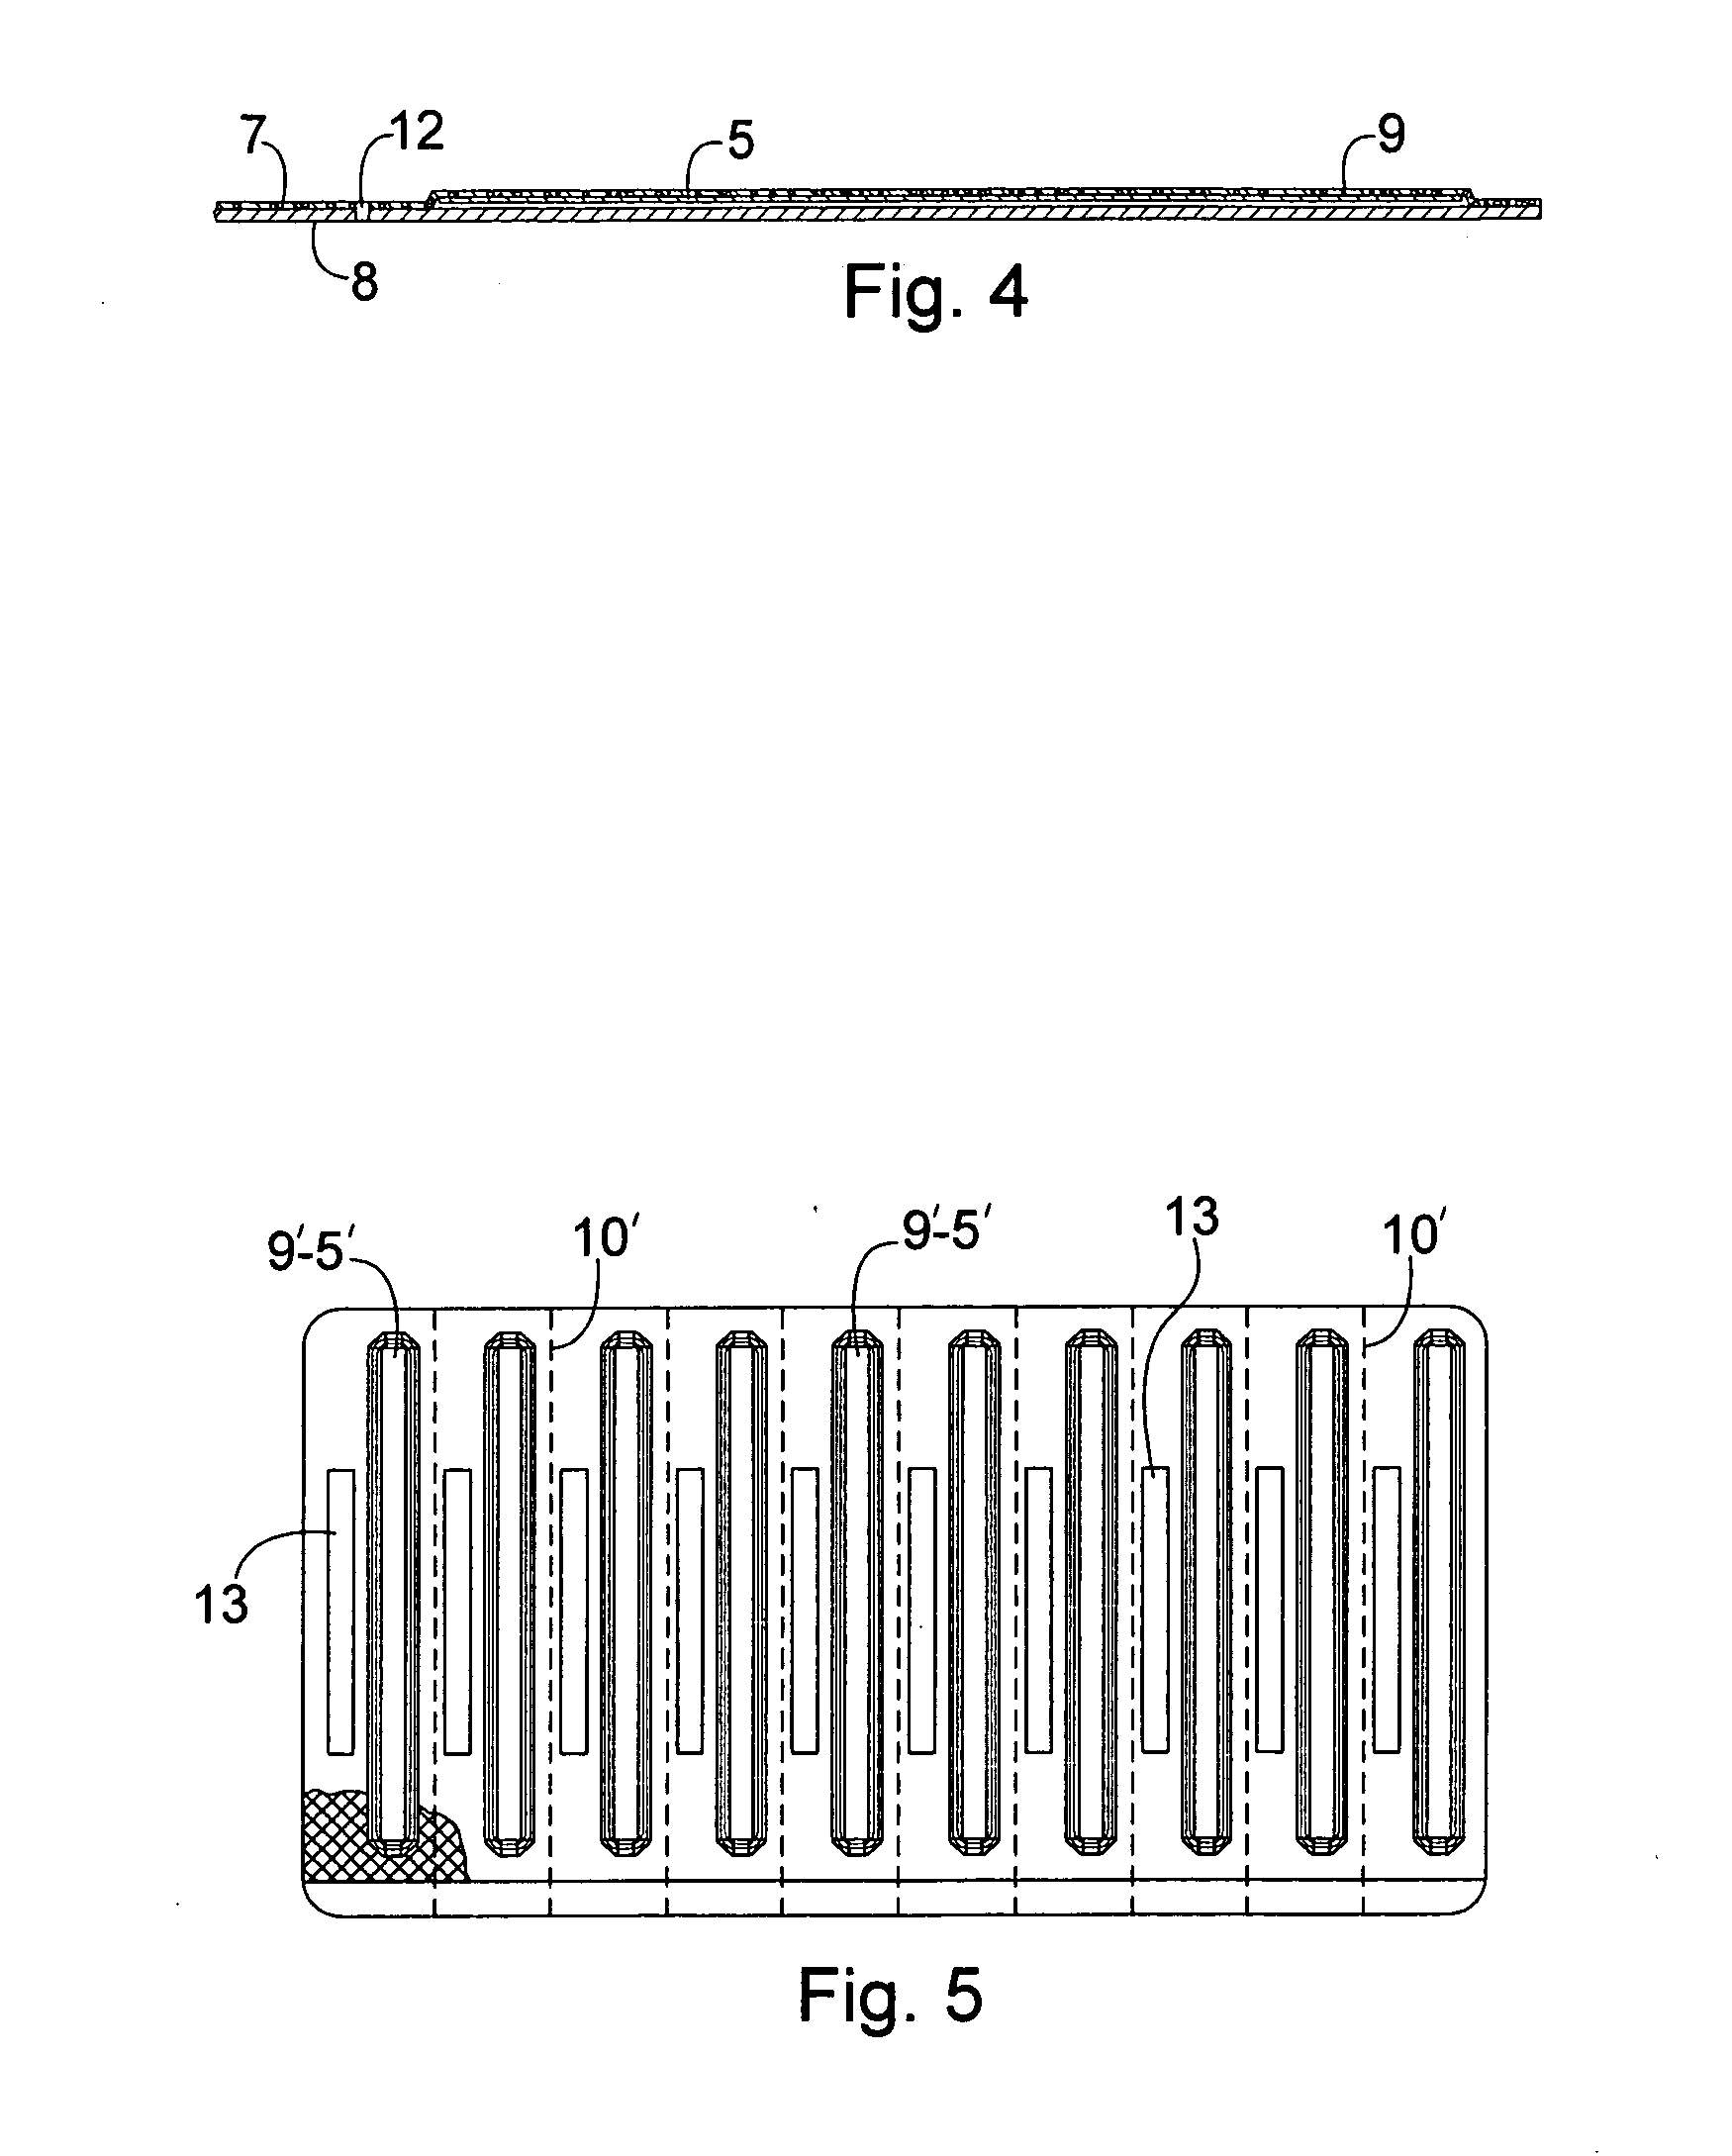 Blistered rapid diagnostic test with incorporated moisture absorbent material